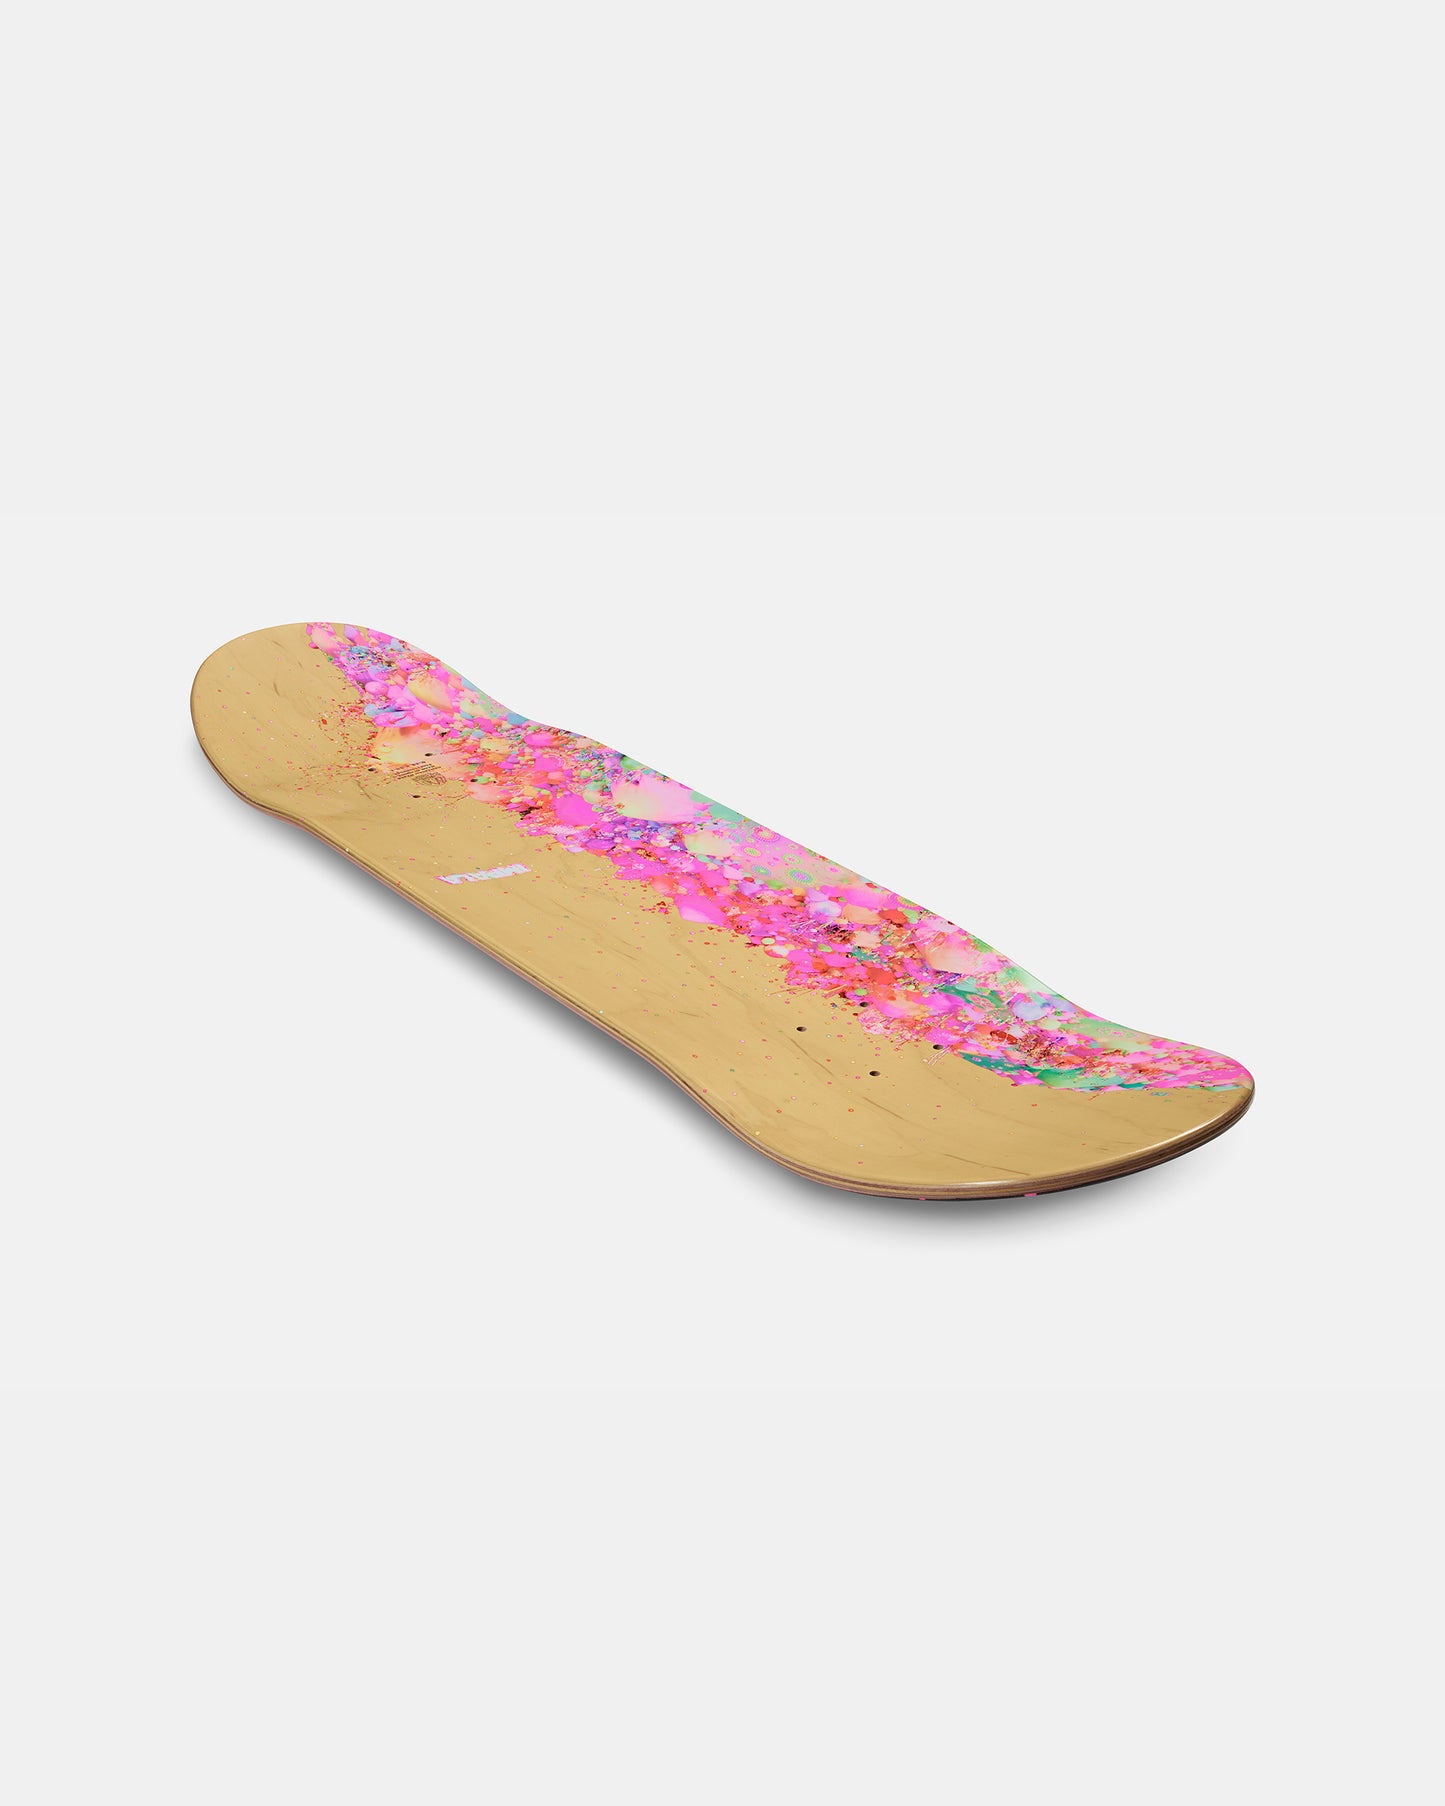 Pip and Pop Deck - 8.25" Candy Mountain - Impala Rollerskate